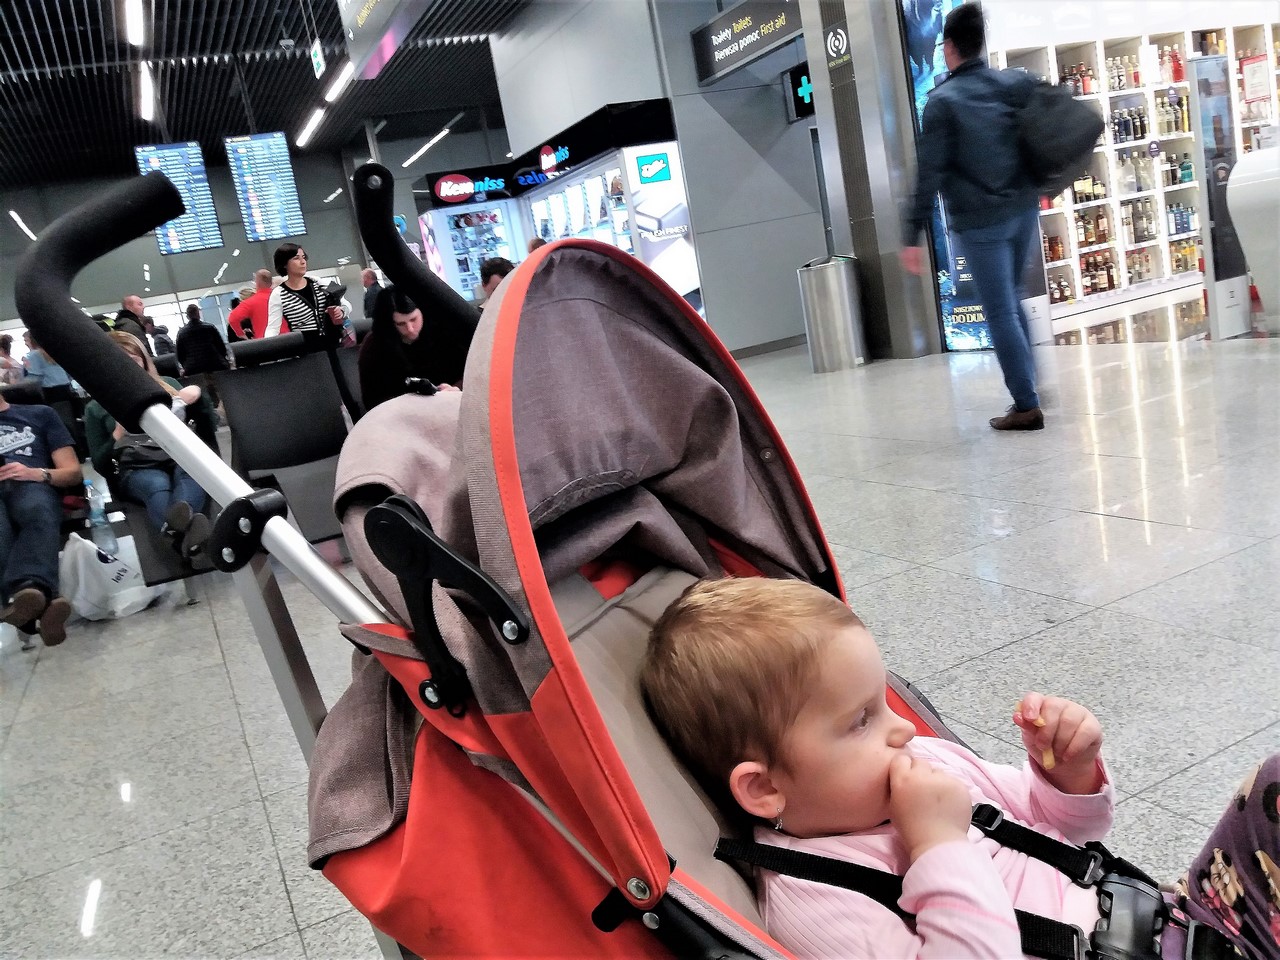 Tips On Flying With A Toddler